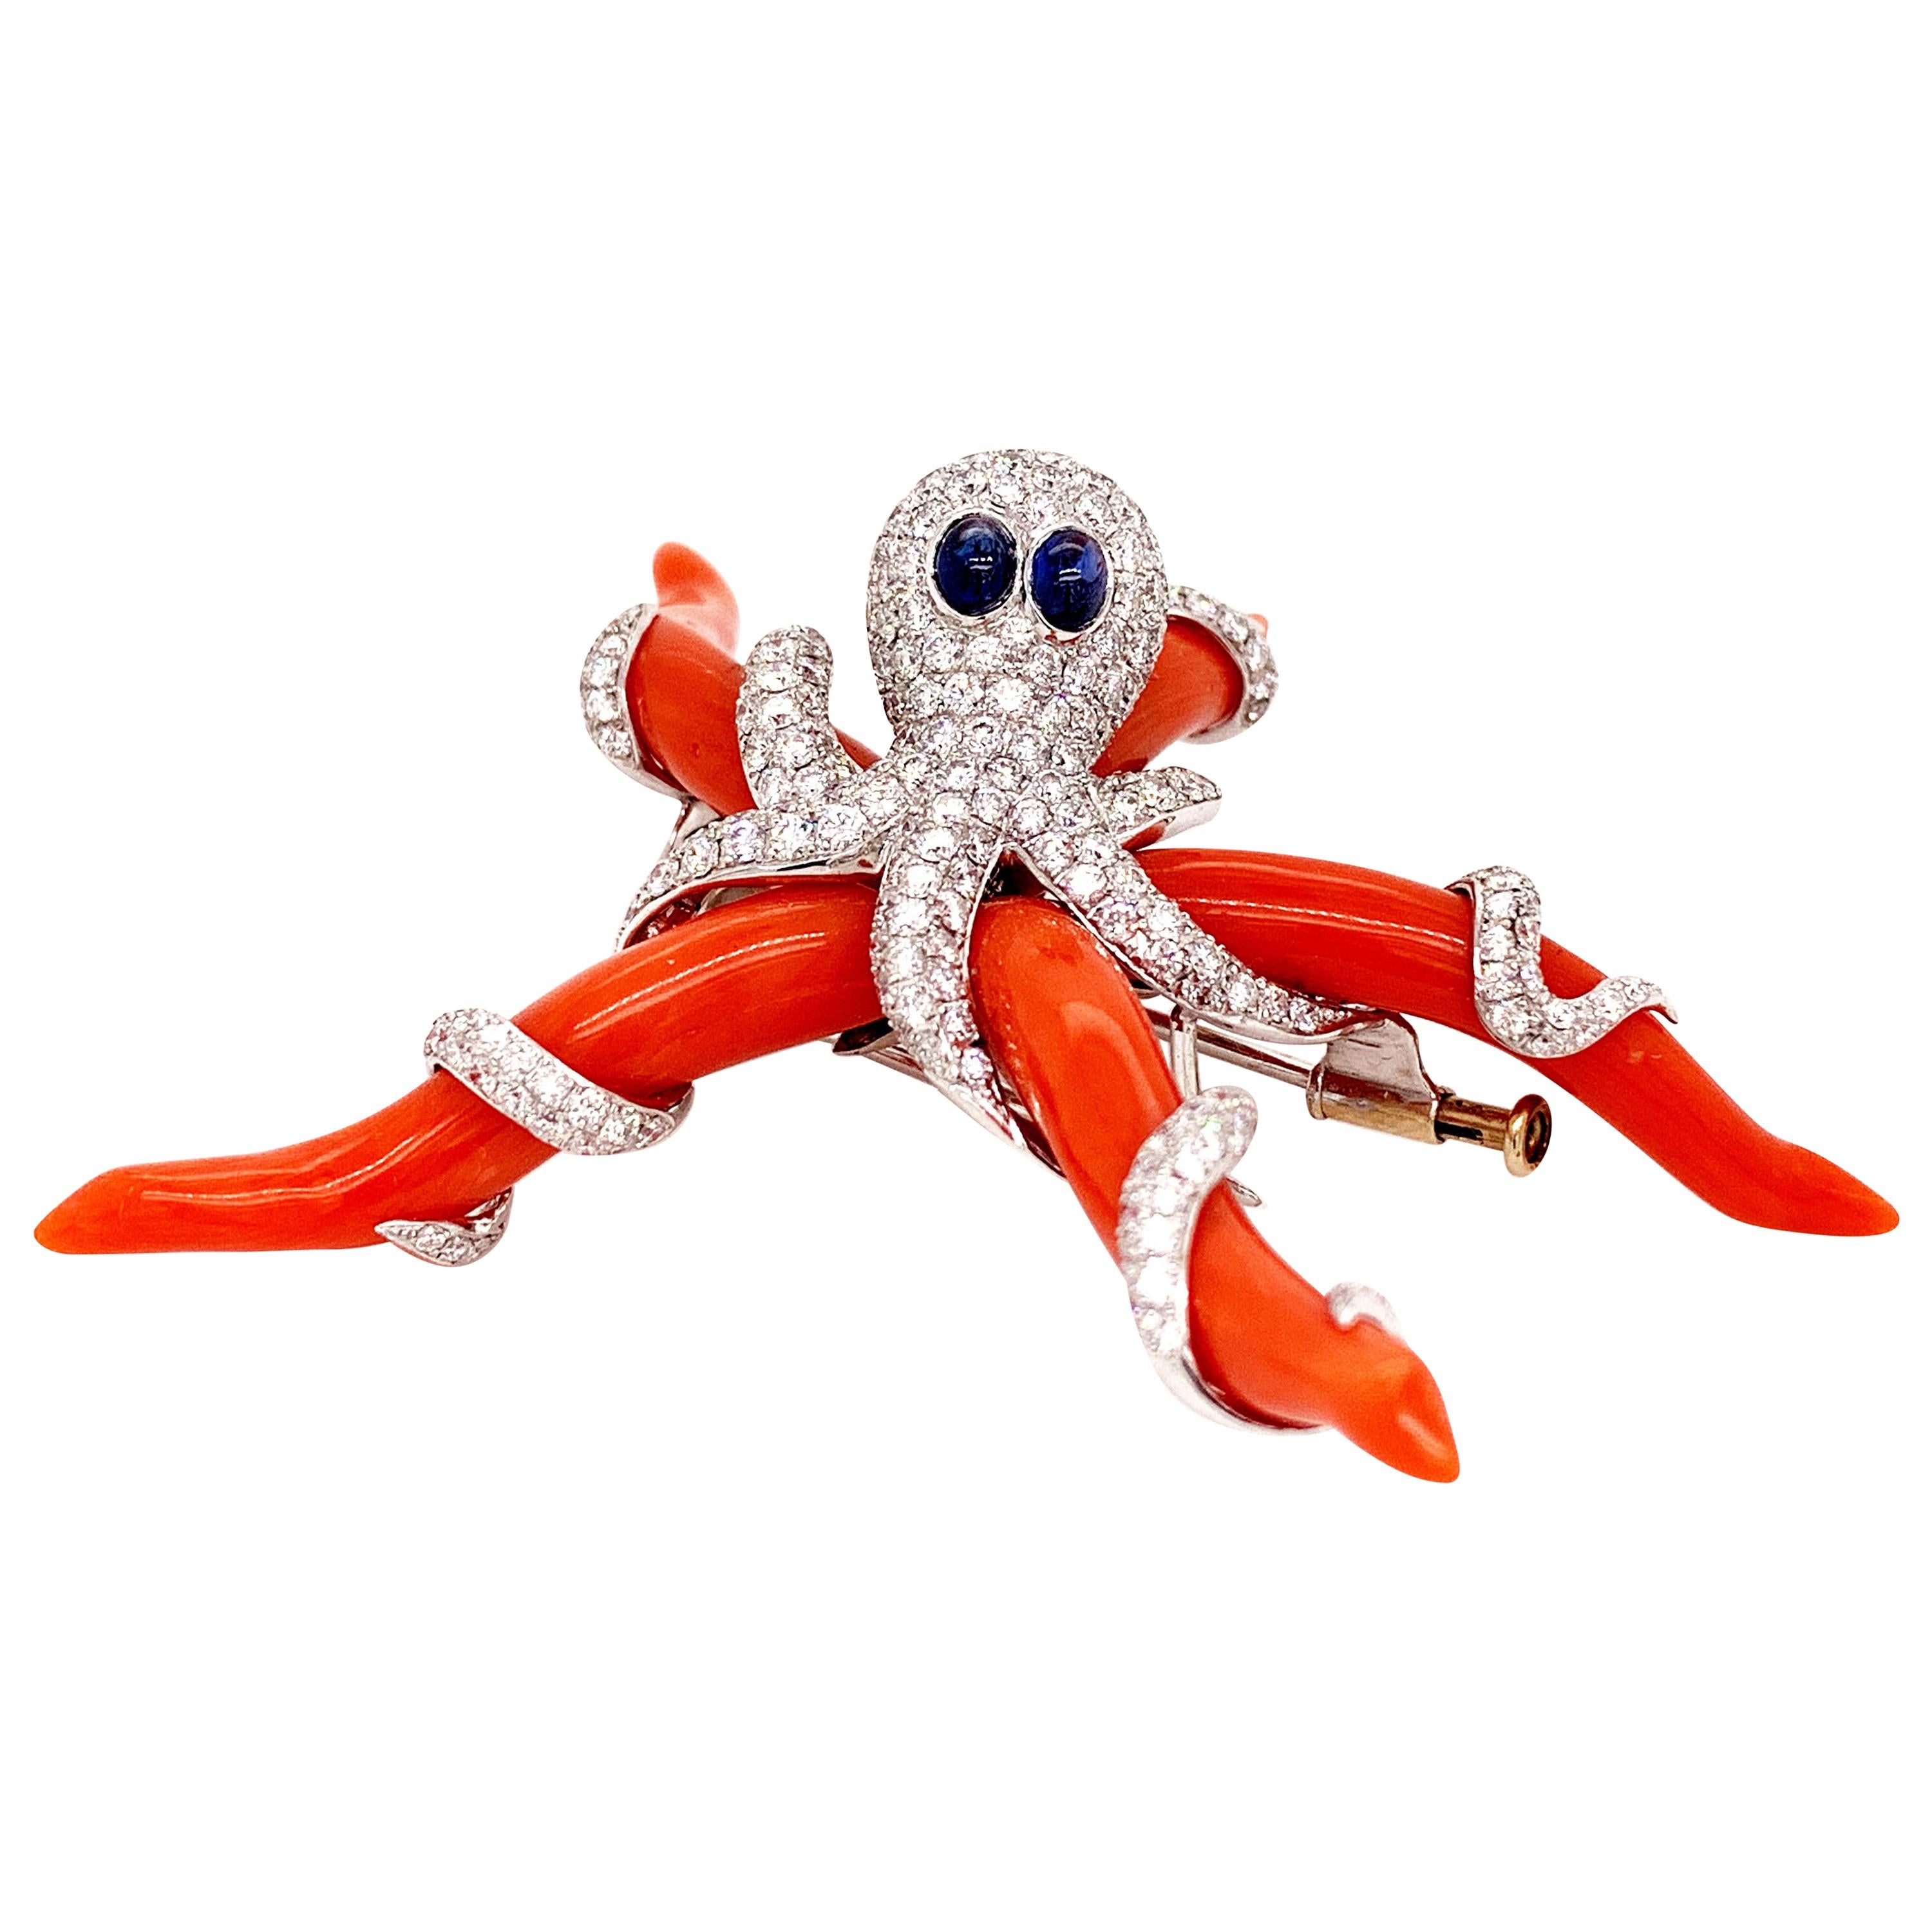 Sophia D, 39.12 Carat Octopus Coral Brooch with Diamond and Sapphire For Sale